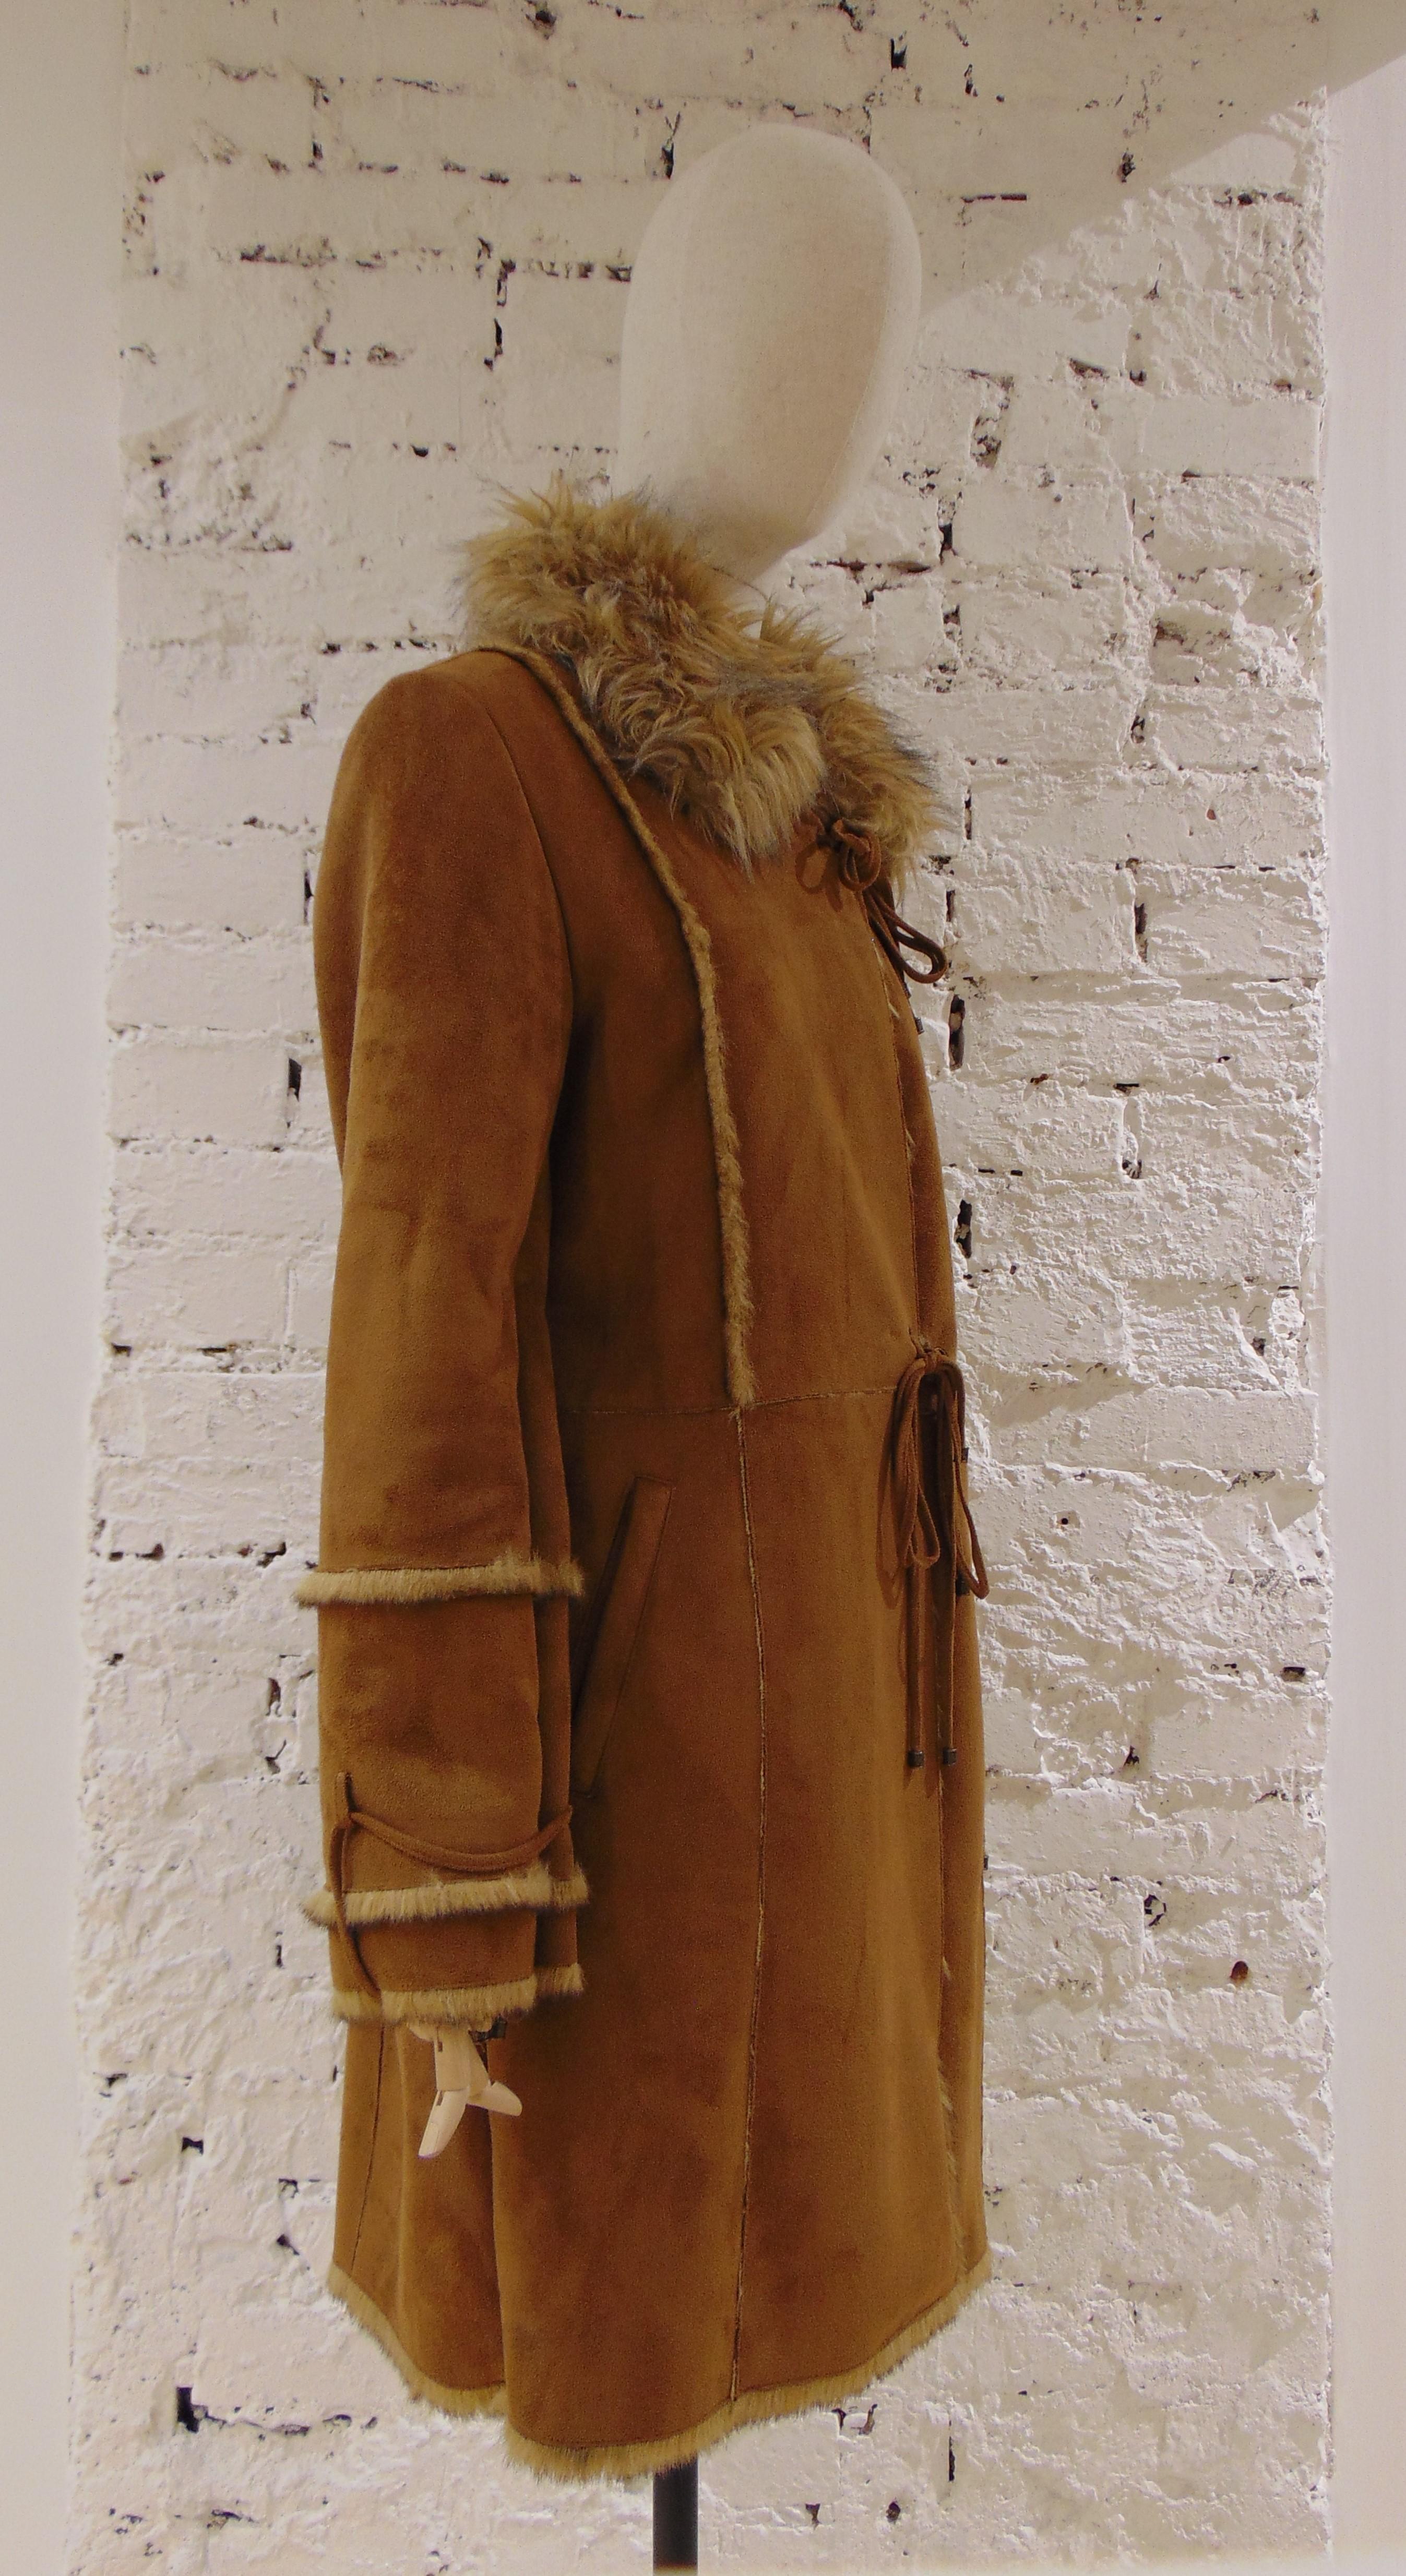 Balmain Brown Coat
totally made in france
fur free
composition polyester and polyacrylic 
Size Large